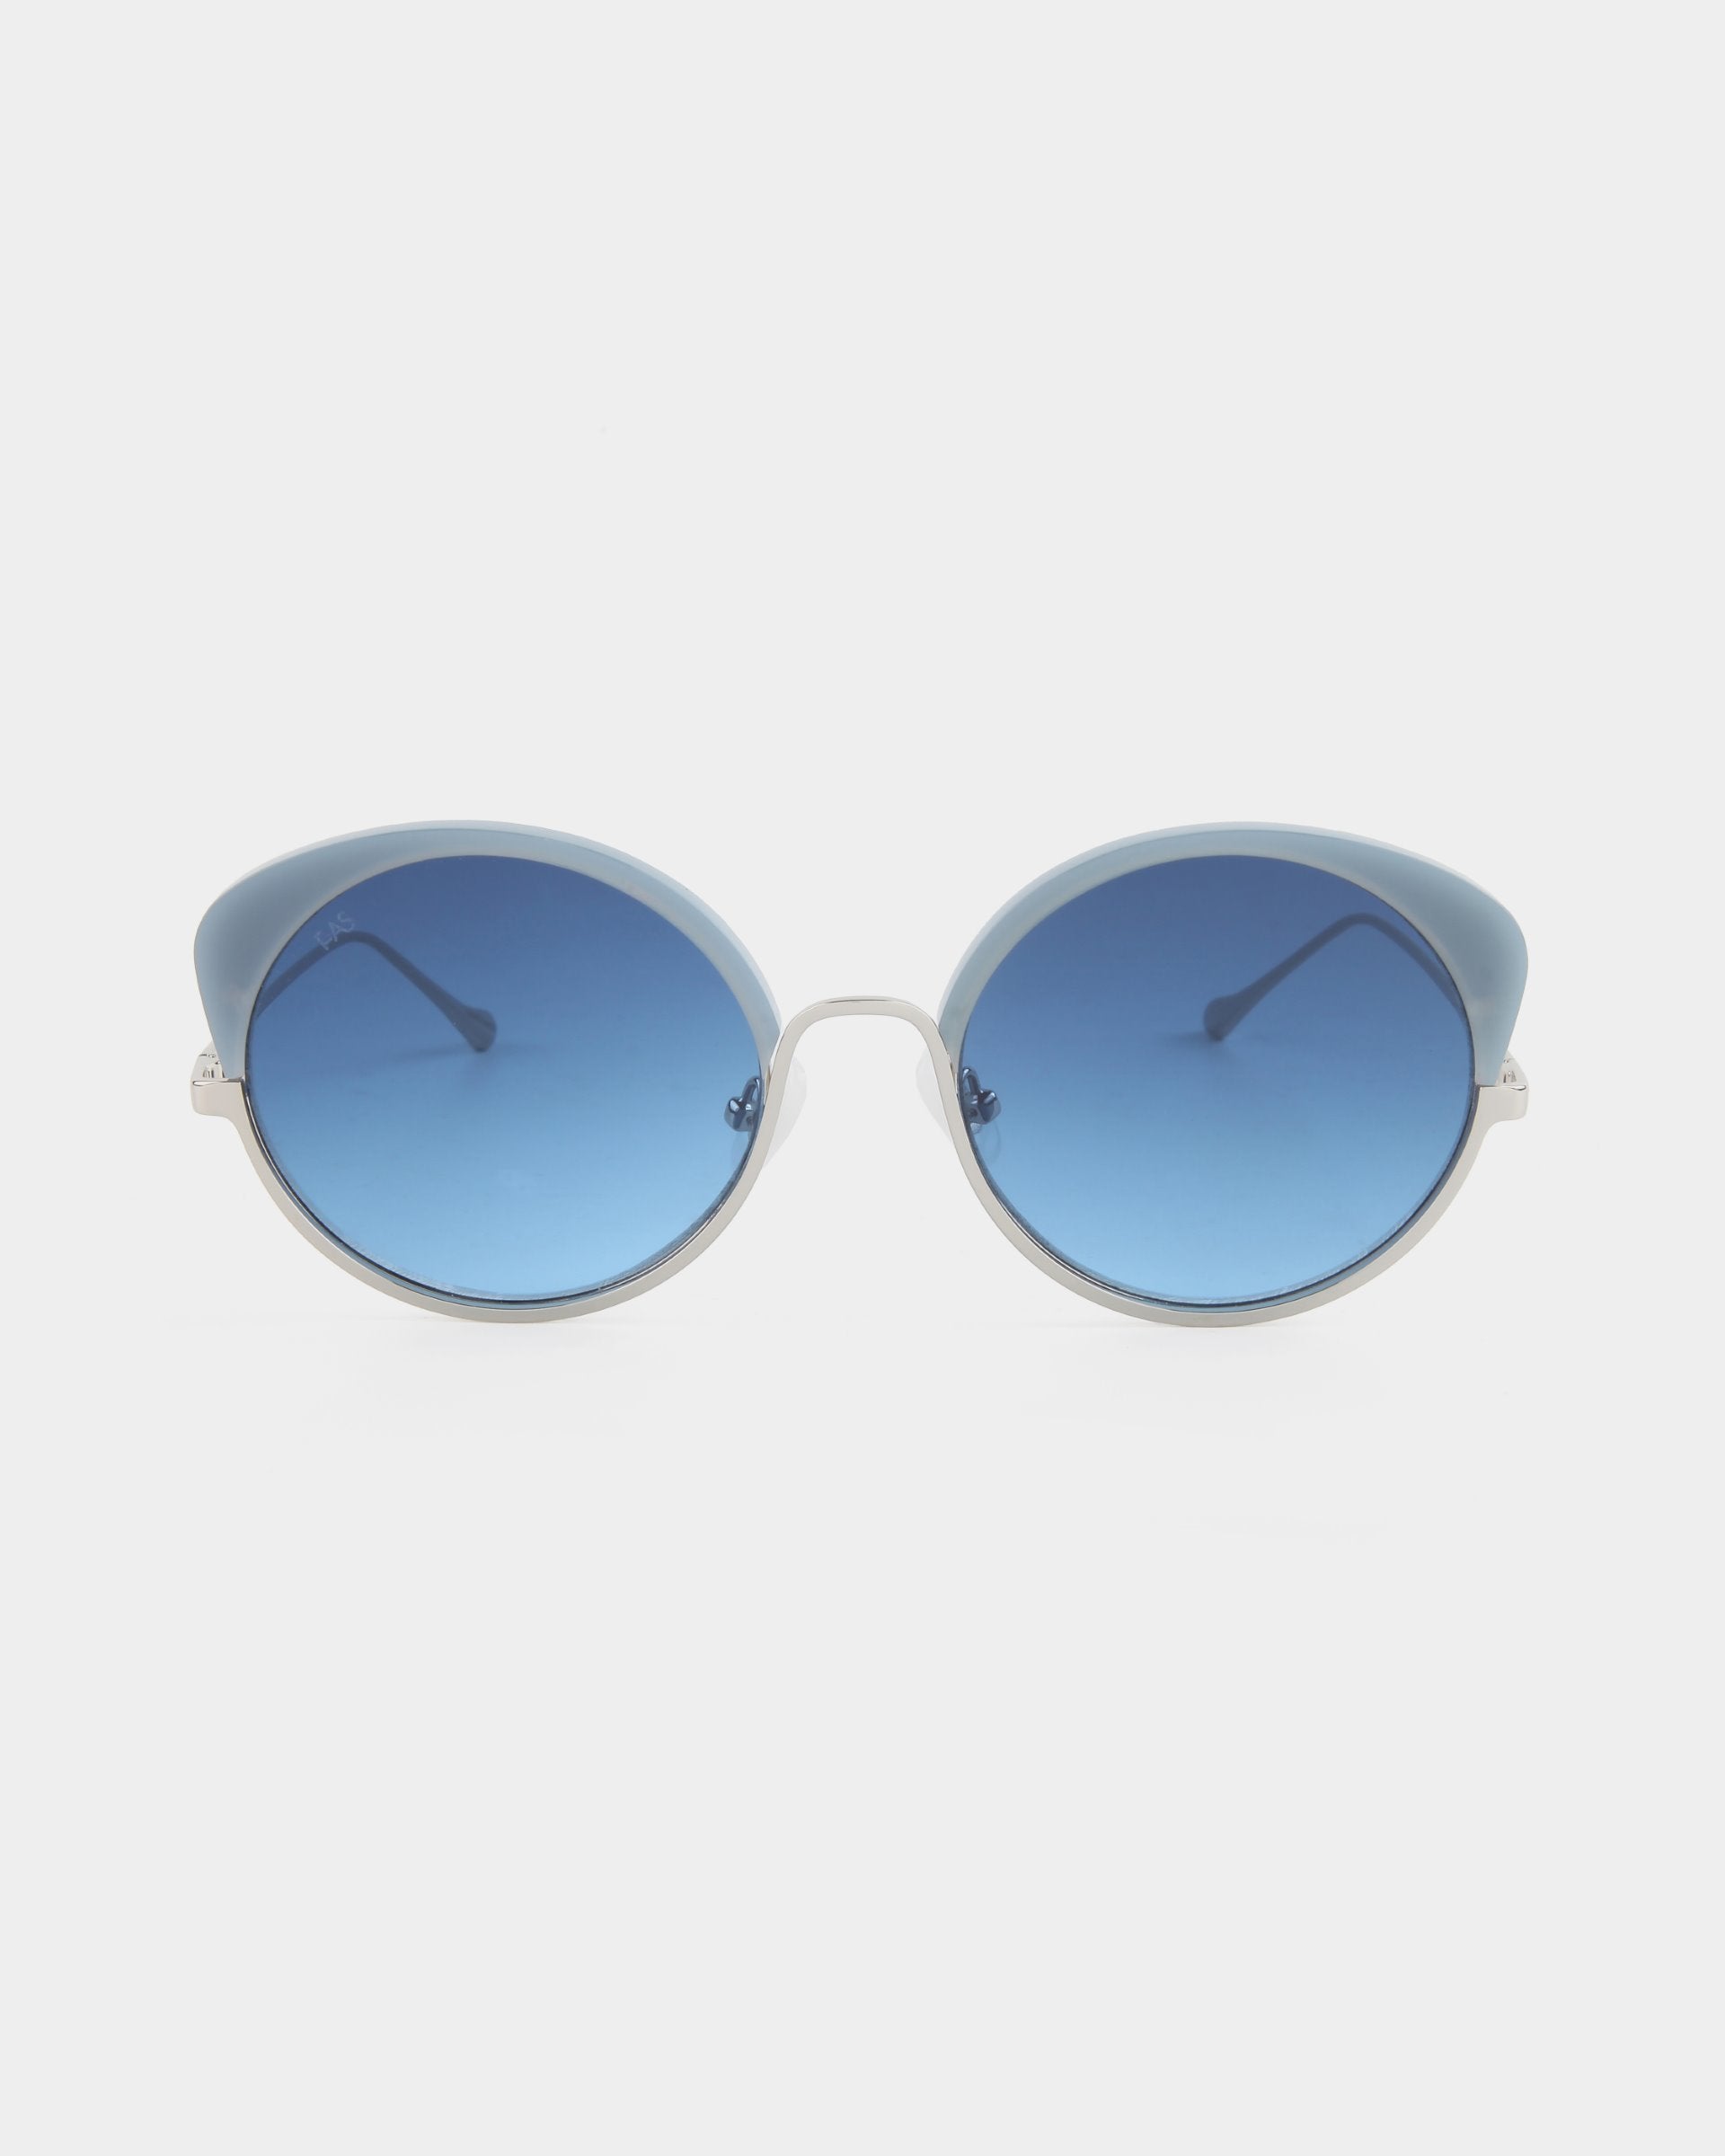 A pair of round, blue-tinted Cocoon sunglasses by For Art&#39;s Sake® with thin metallic frames and light blue to clear gradient lenses, viewed from the front against a plain white background. This handcrafted eyewear not only exudes elegance but also offers UV protection for your eyes.